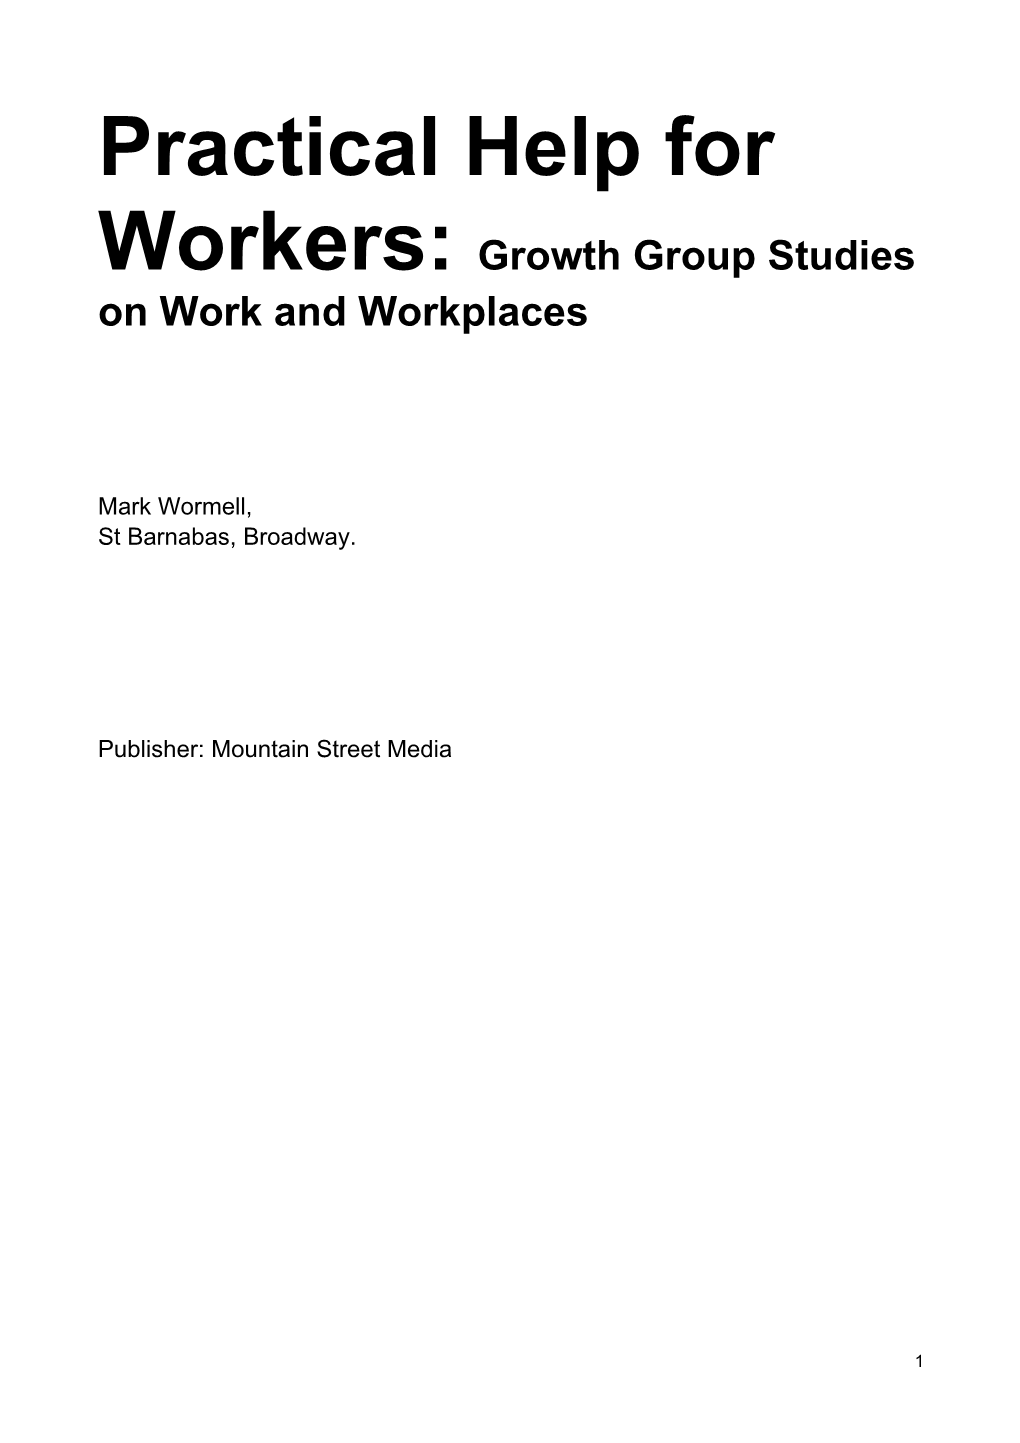 Practical Help for Workers: Growth Group Studies on Work and Workplaces